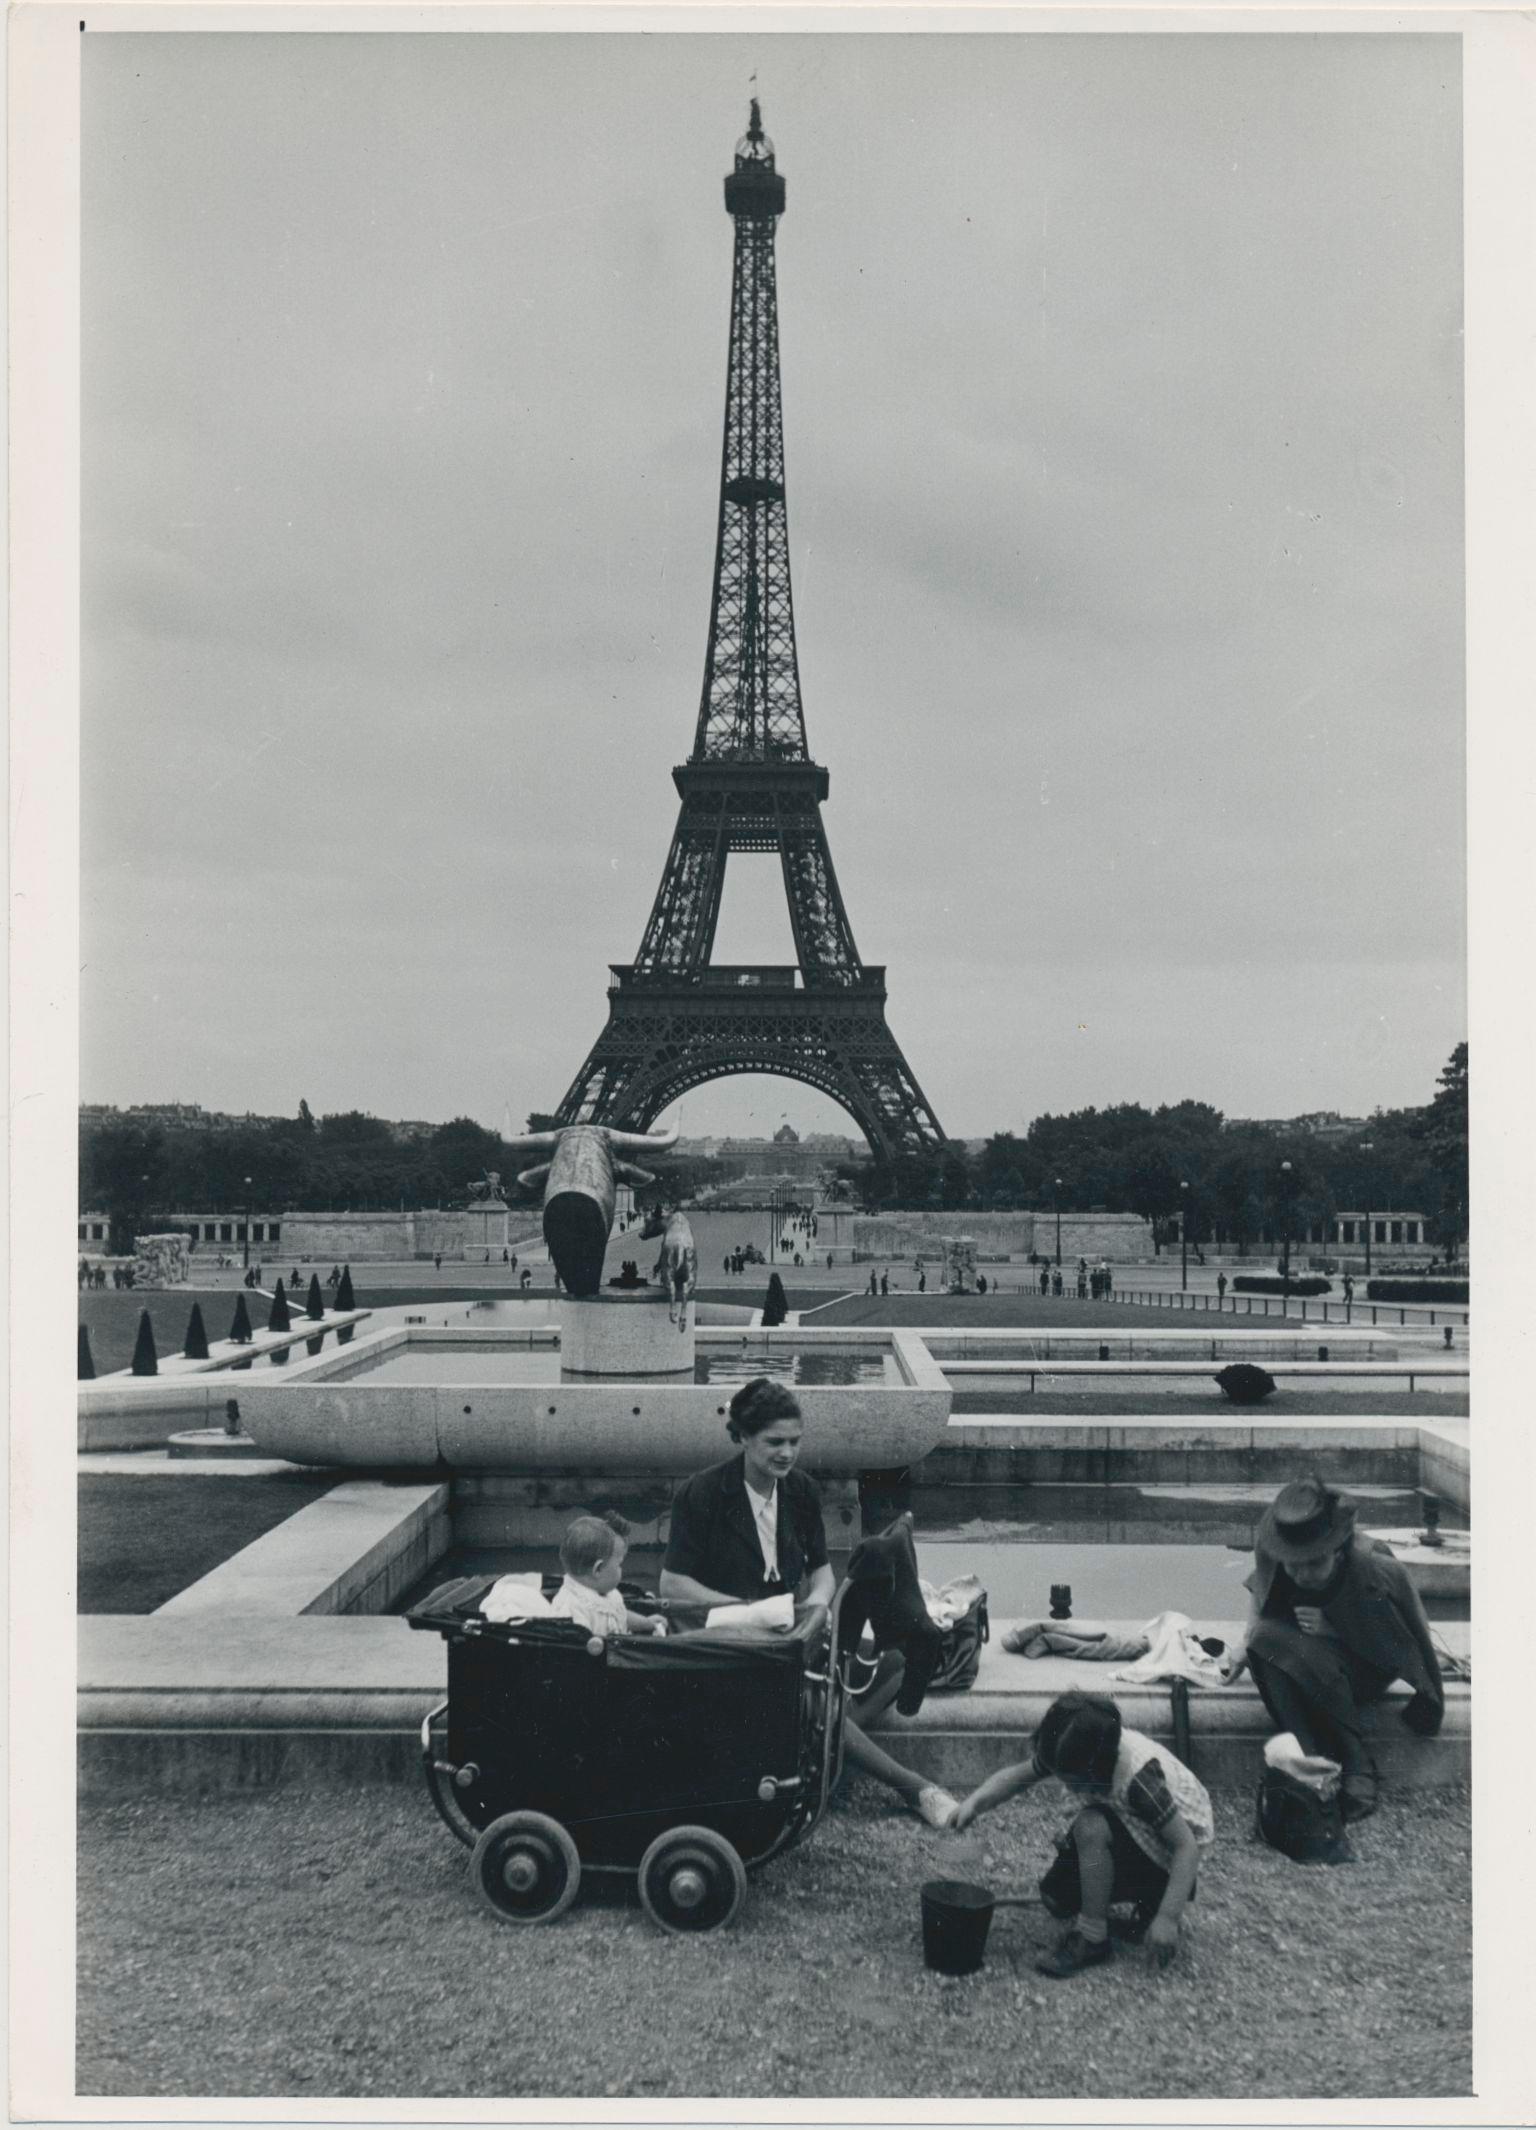 Erich Andres Black and White Photograph - Eiffel Tower, Family, Black and White, France 1950s, 17, 9 x 12, 9 cm